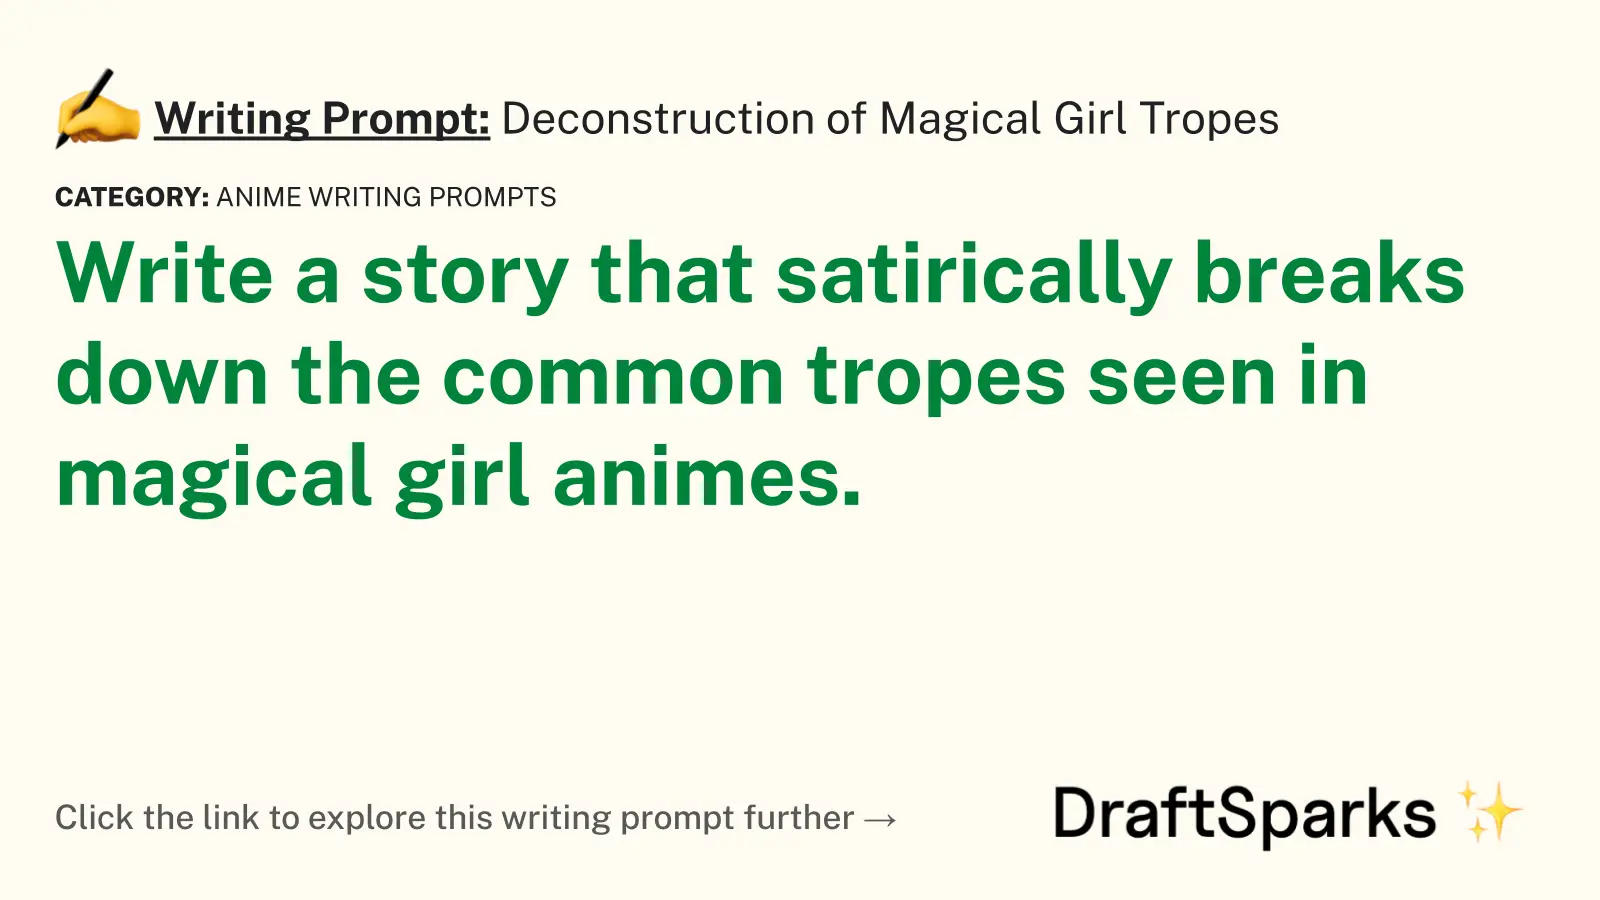 Deconstruction of Magical Girl Tropes